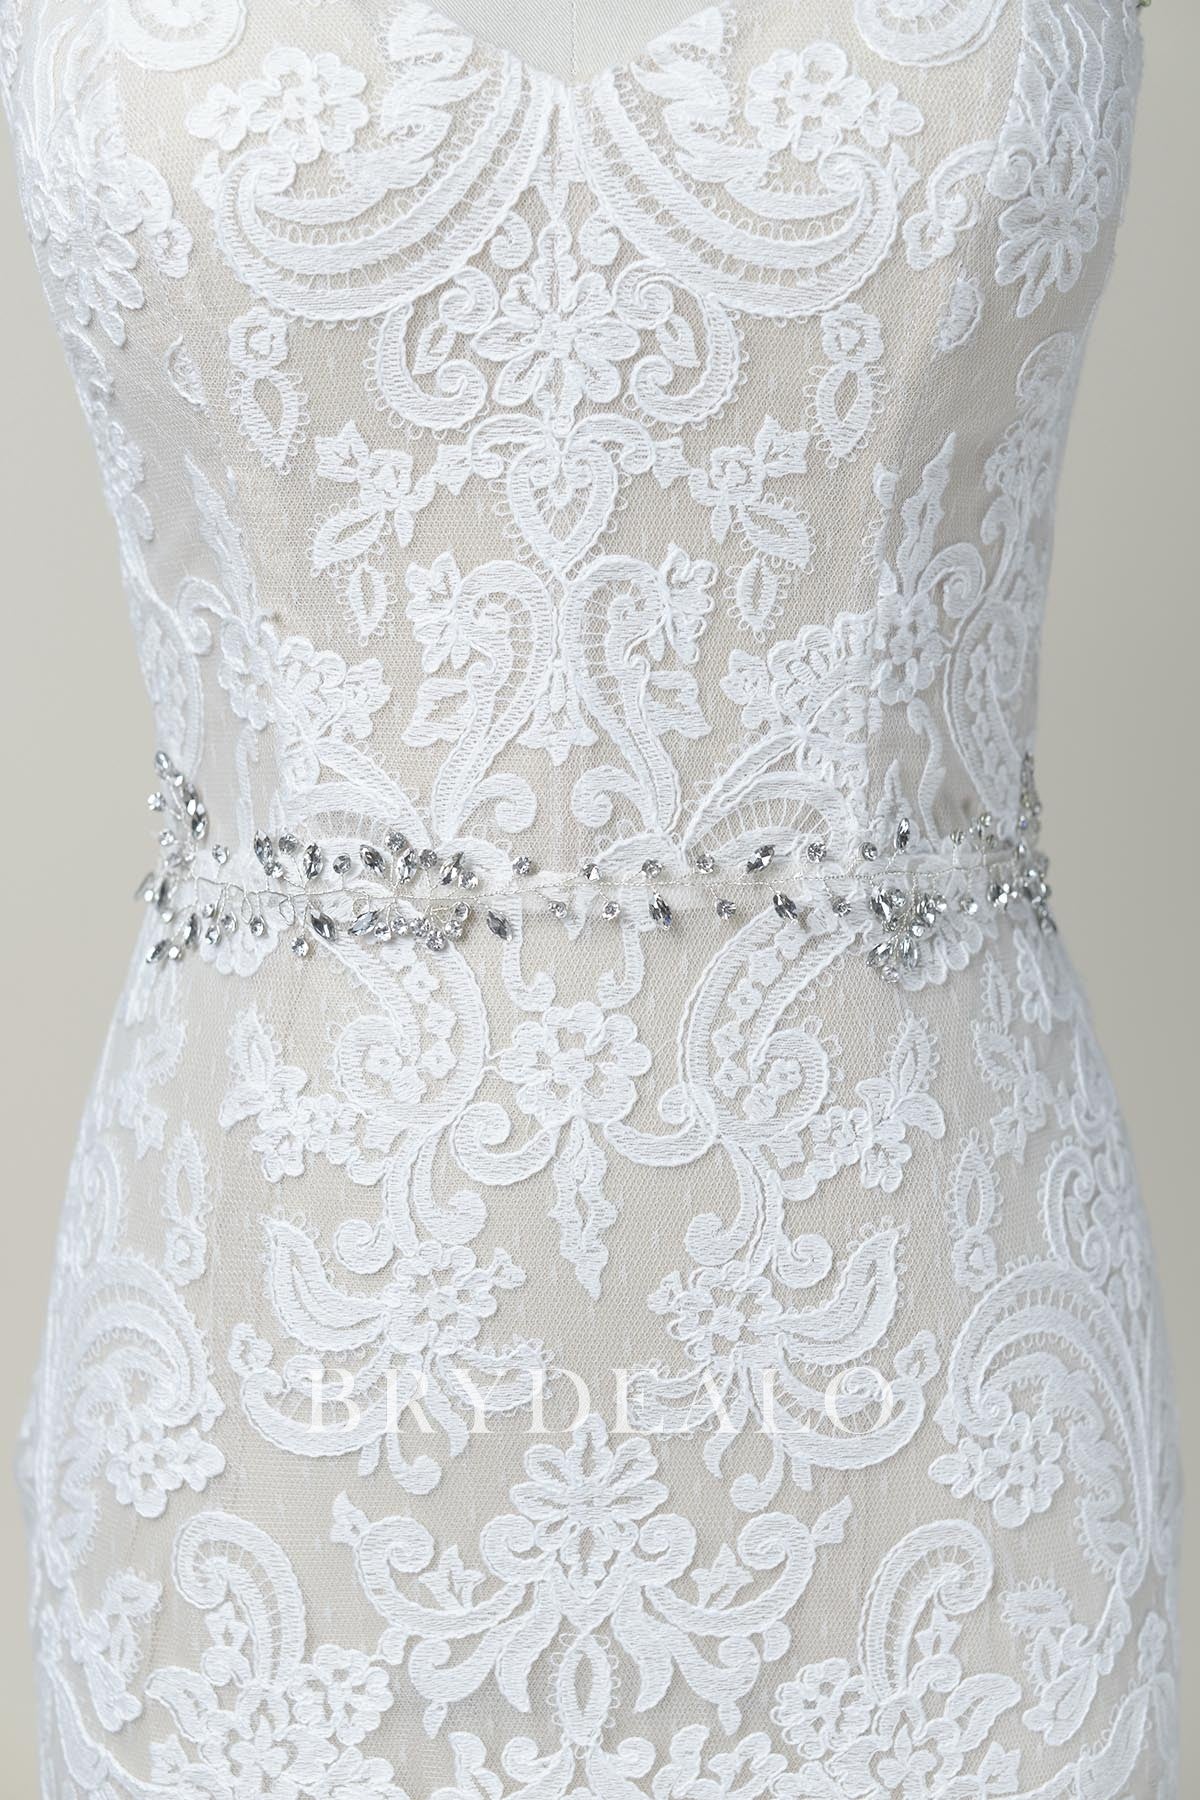 Delicate Crystal Silver Filament Sash with Satin Ties